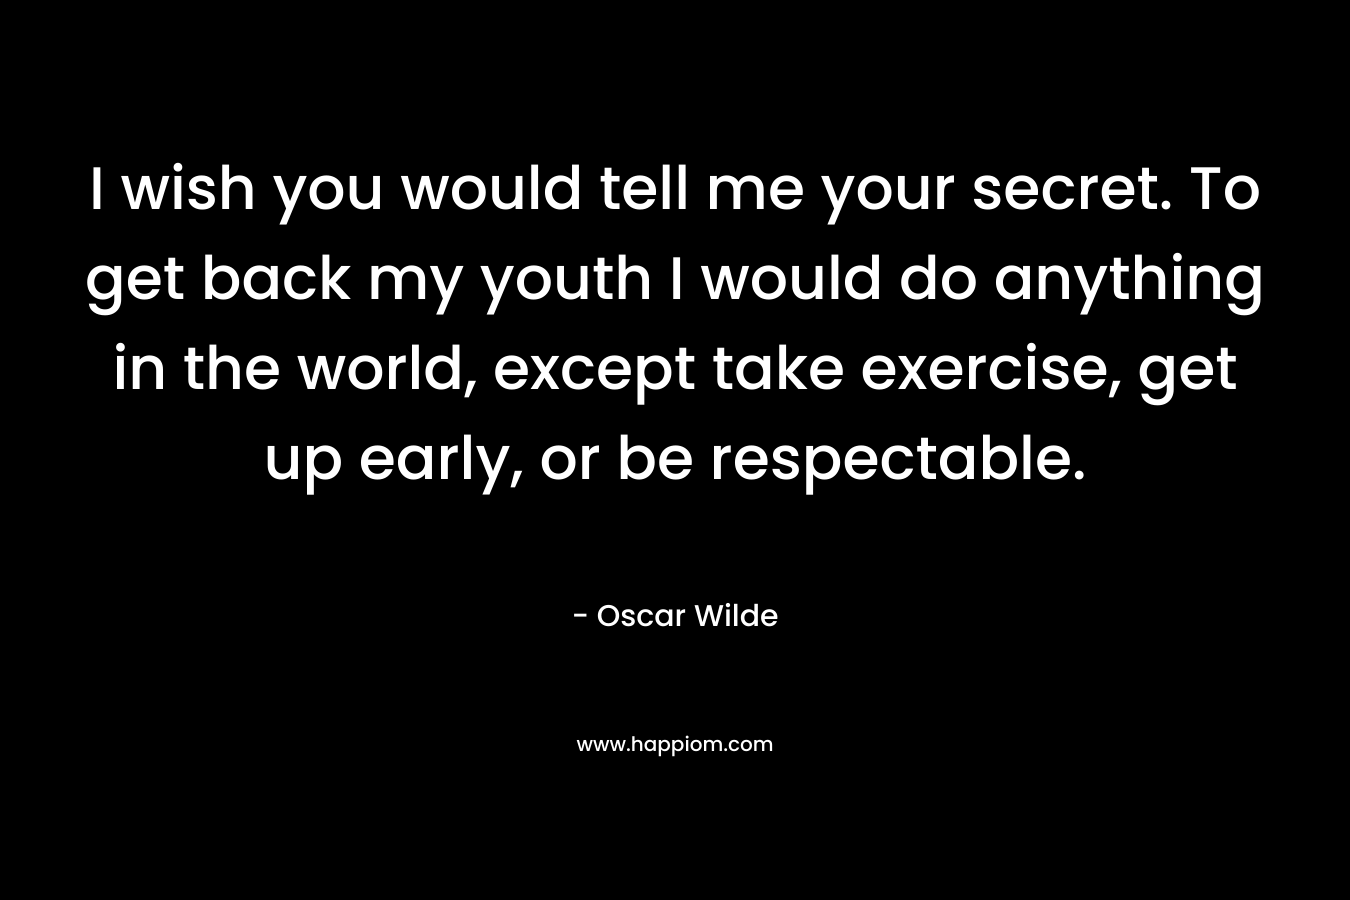 I wish you would tell me your secret. To get back my youth I would do anything in the world, except take exercise, get up early, or be respectable.